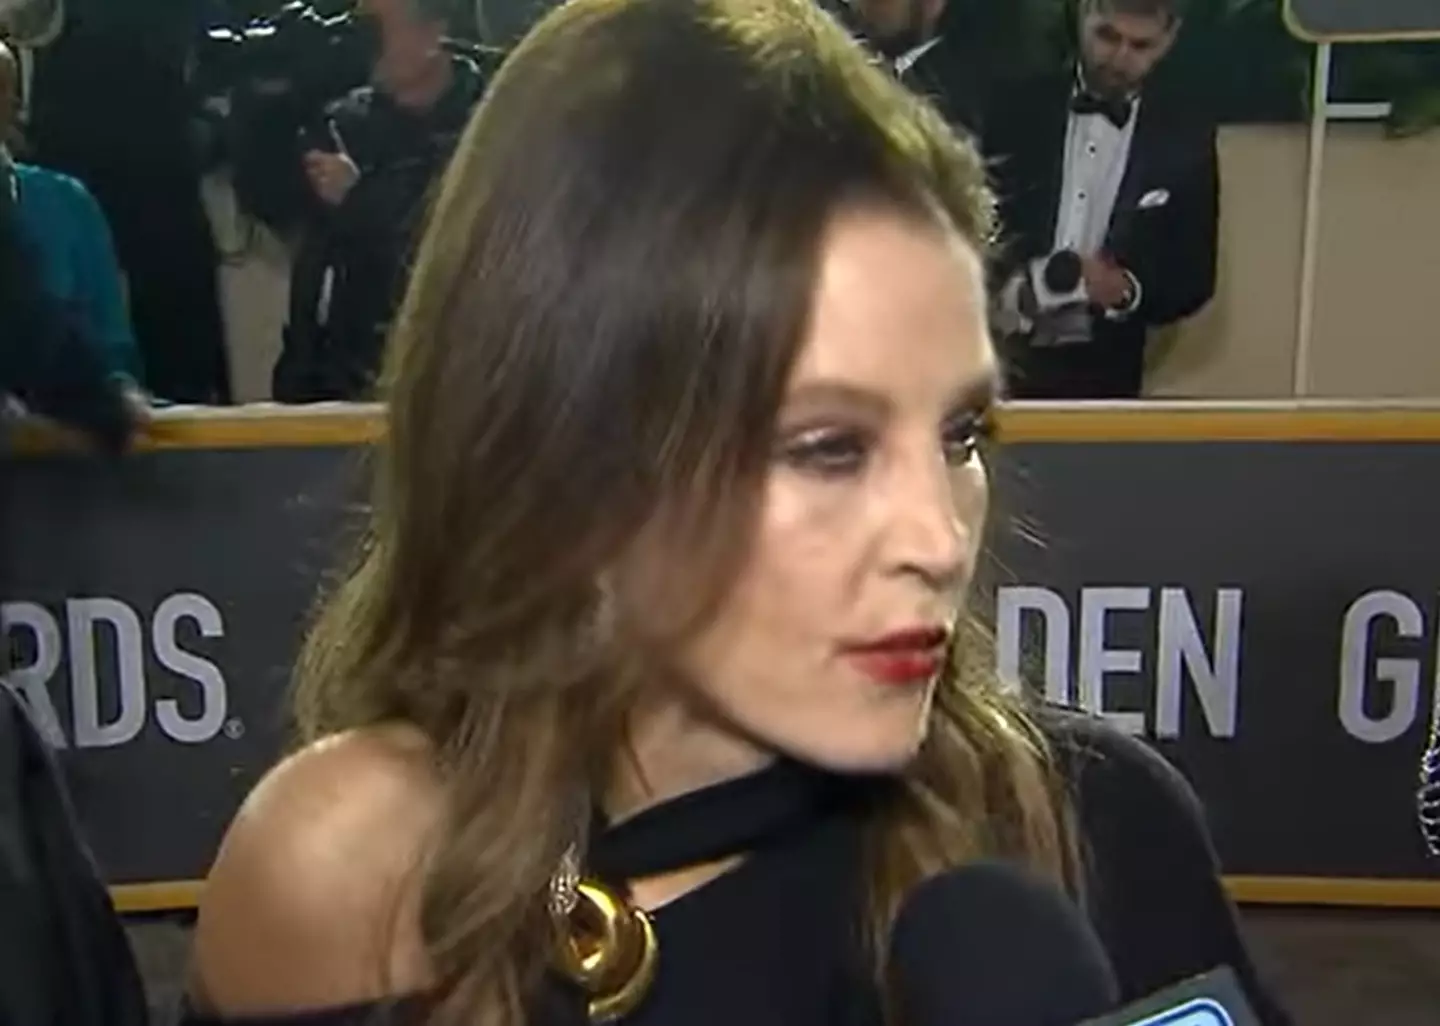 Many who saw footage of Lisa Marie Presley at the Golden Globes were saddened and believed she was 'frail'.